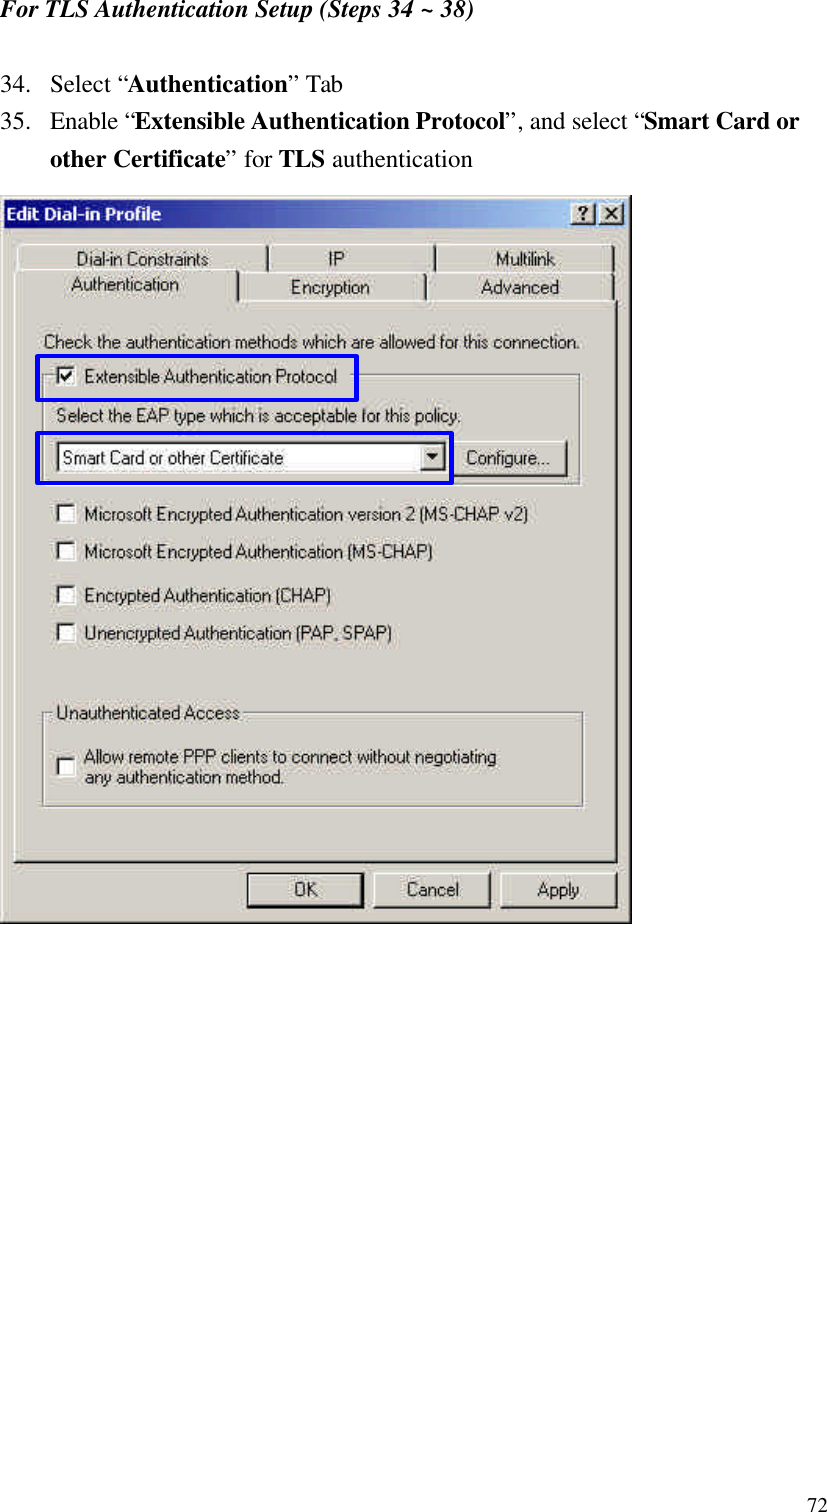  72For TLS Authentication Setup (Steps 34 ~ 38)  34. Select “Authentication” Tab 35. Enable “Extensible Authentication Protocol”, and select “Smart Card or other Certificate” for TLS authentication     